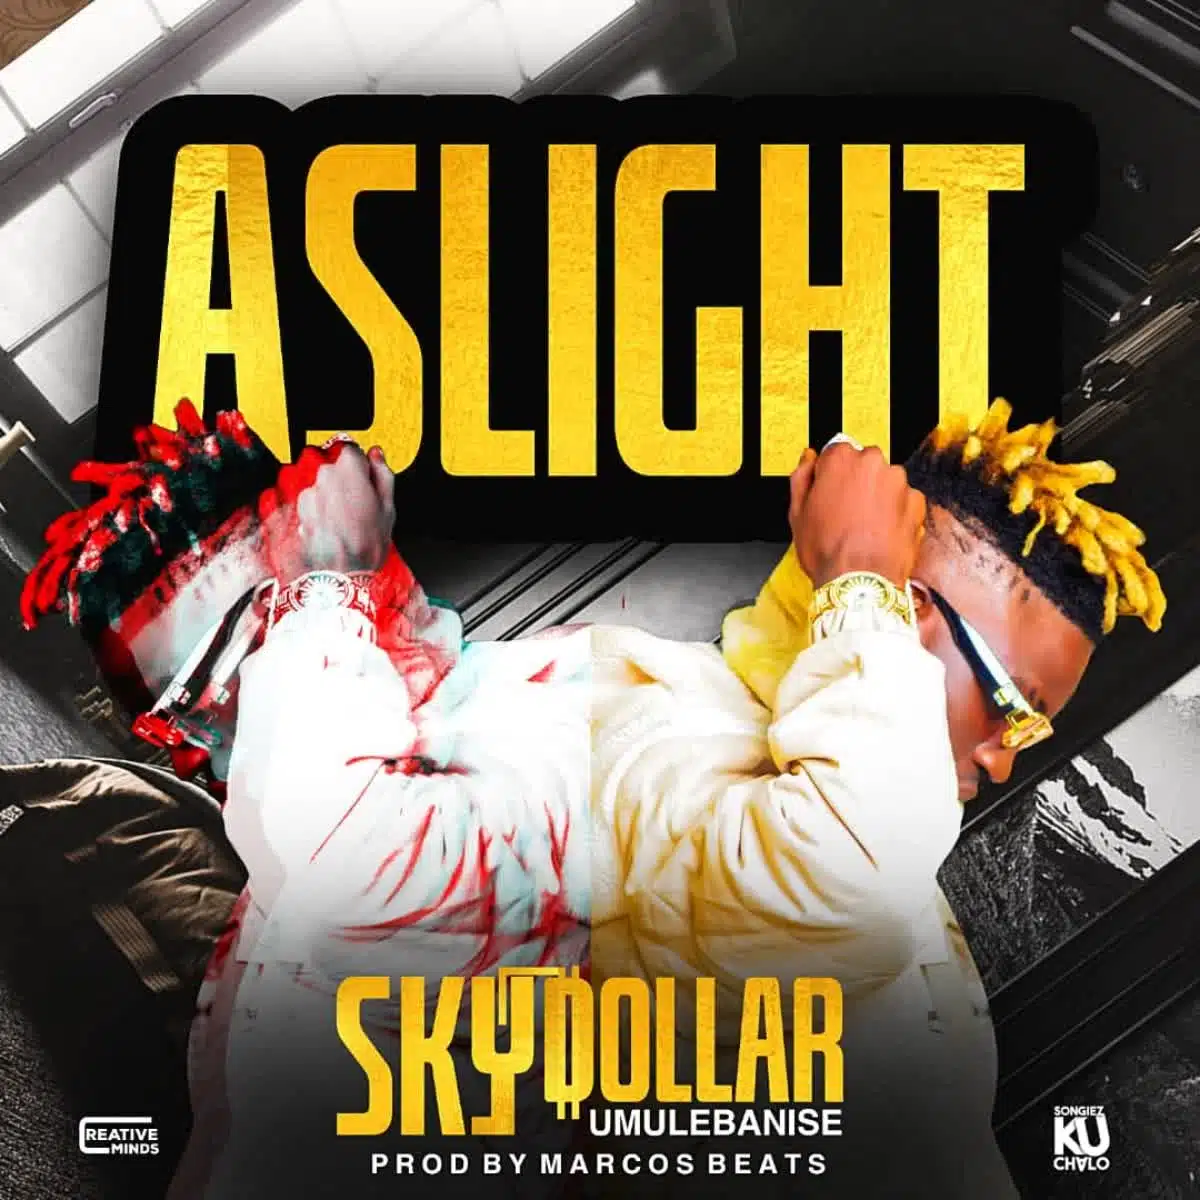 DOWNLOAD: Sky Dollar – “As Right” Mp3